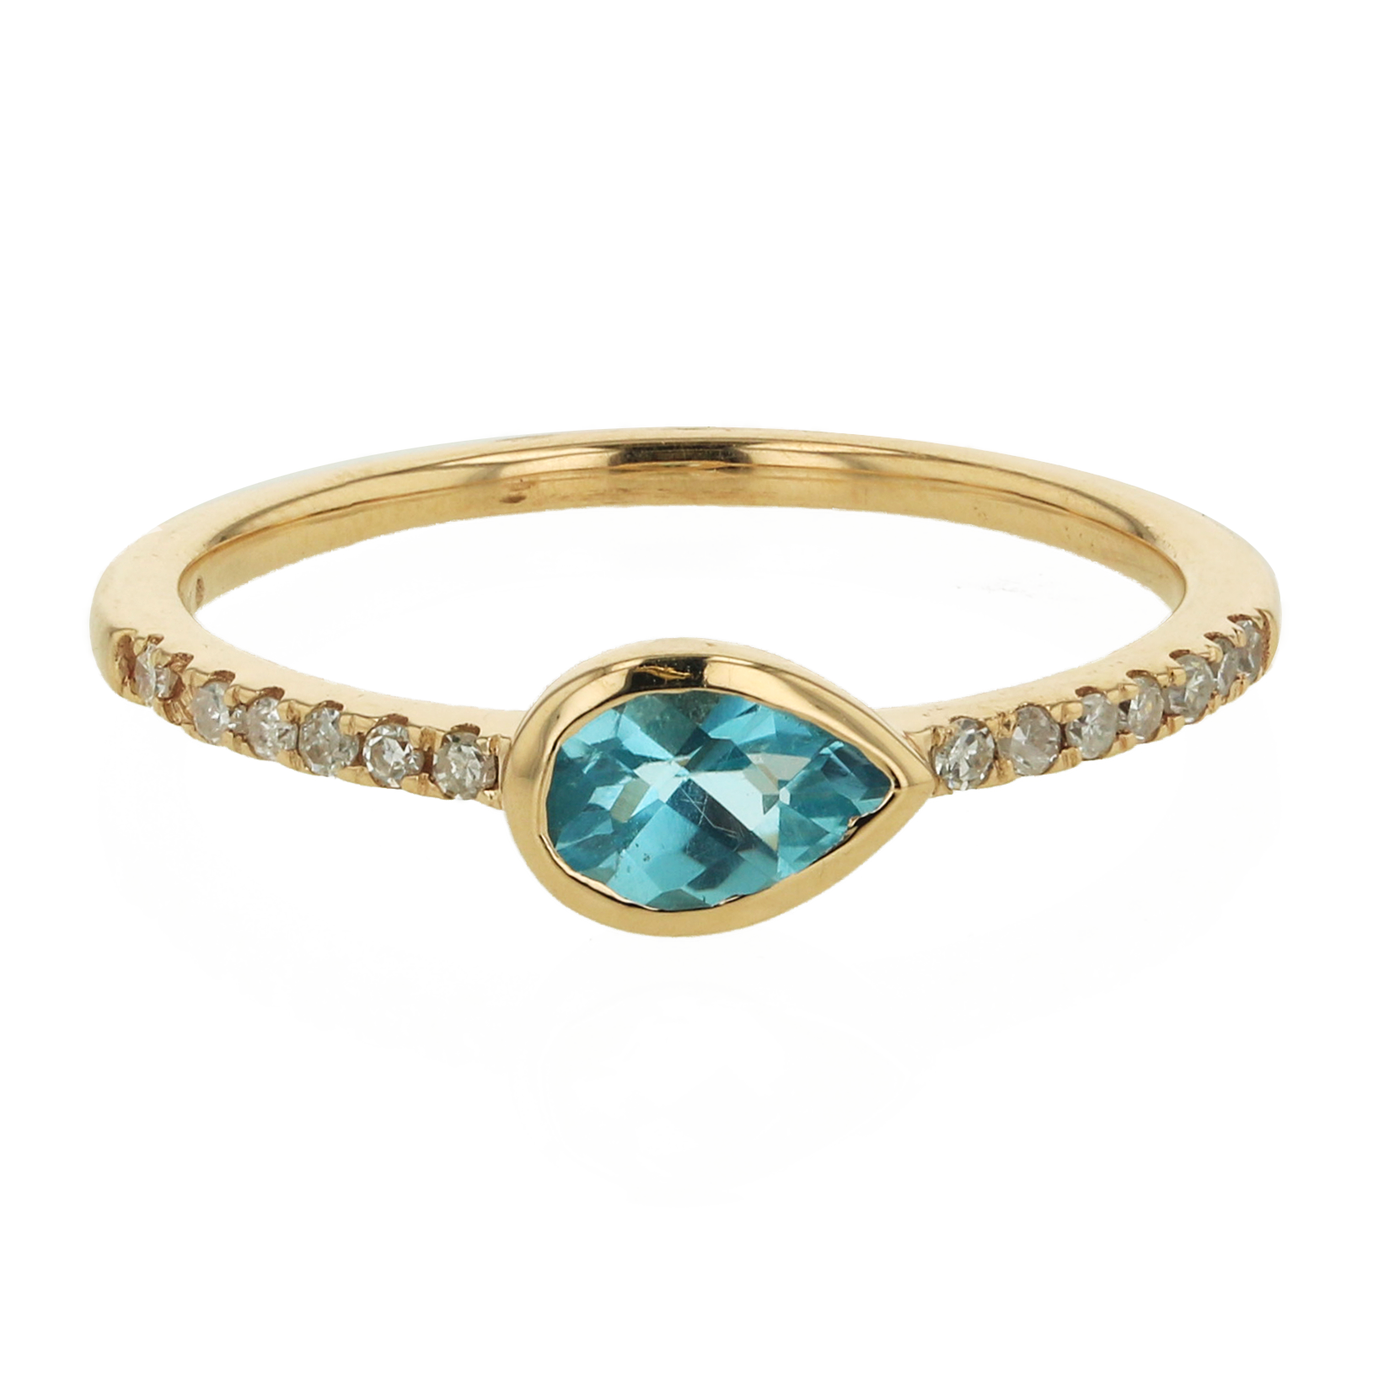 "The Skye" 0.62 CTW Pear Shape Blue Topaz and 0.10 CTTW Diamond Ring